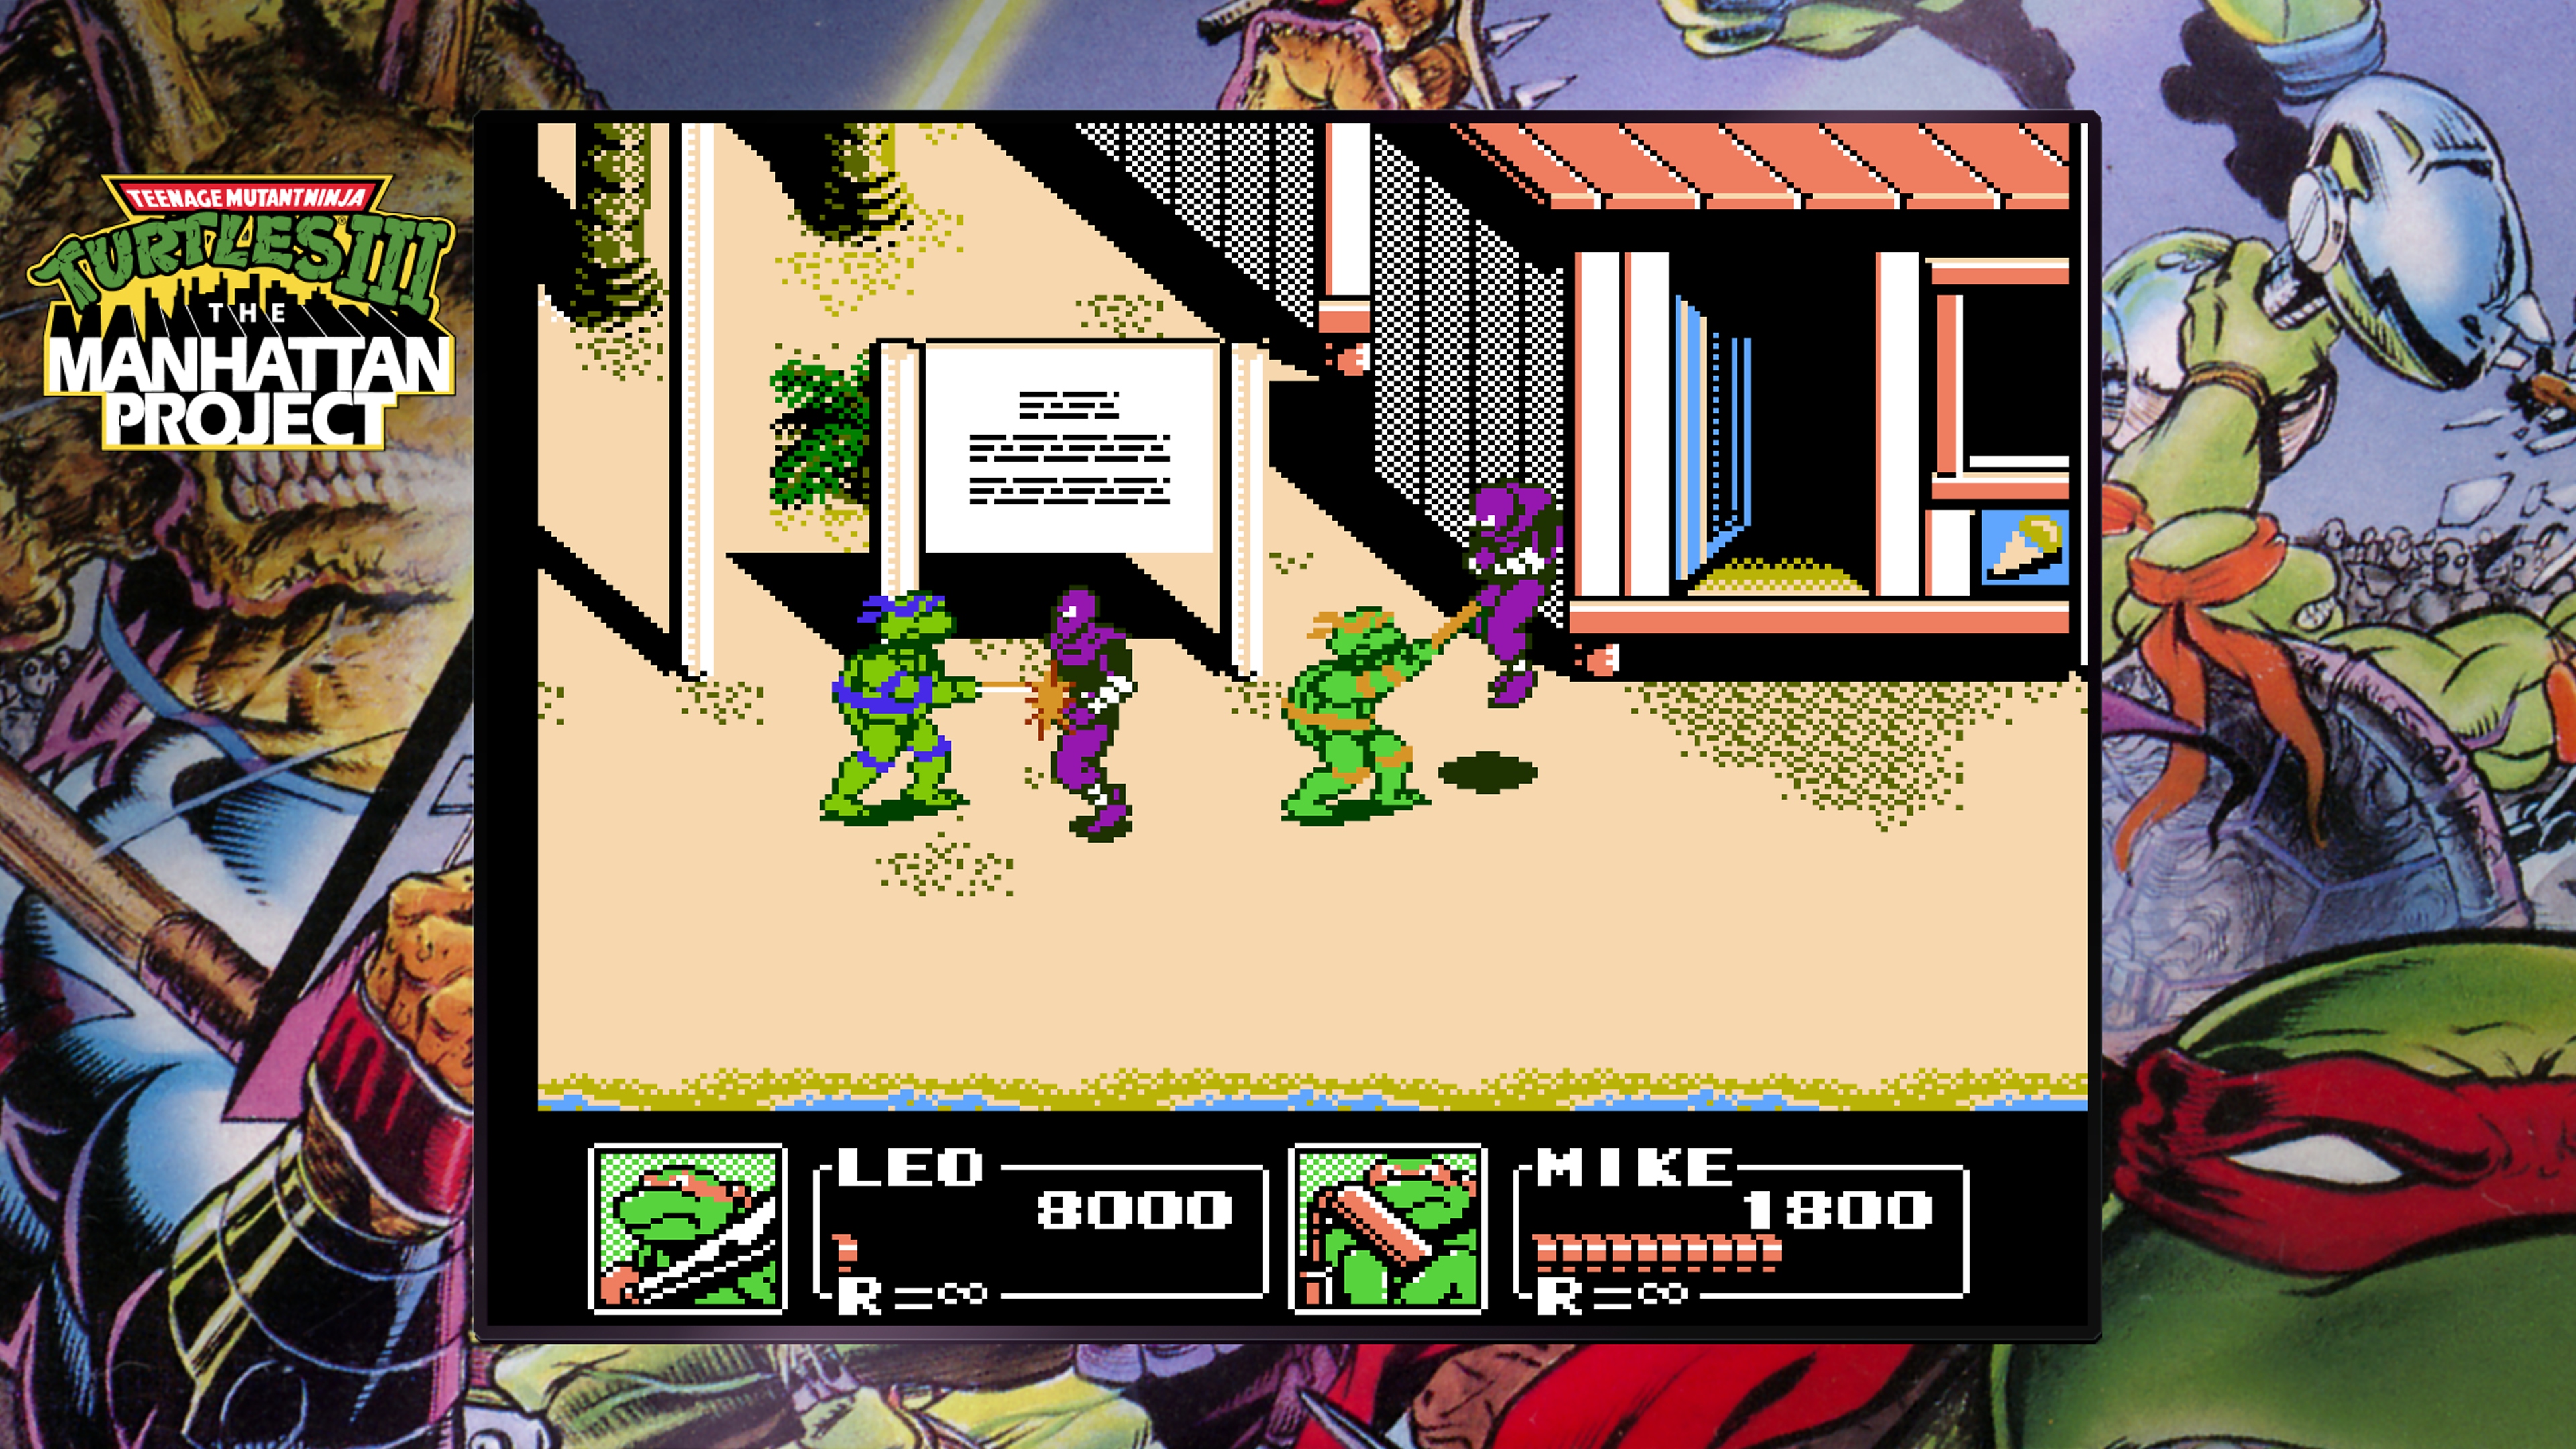 Teenage Mutant Ninja Turtles Collection - The Manhattan Project showing Donatello and Michelangelo 